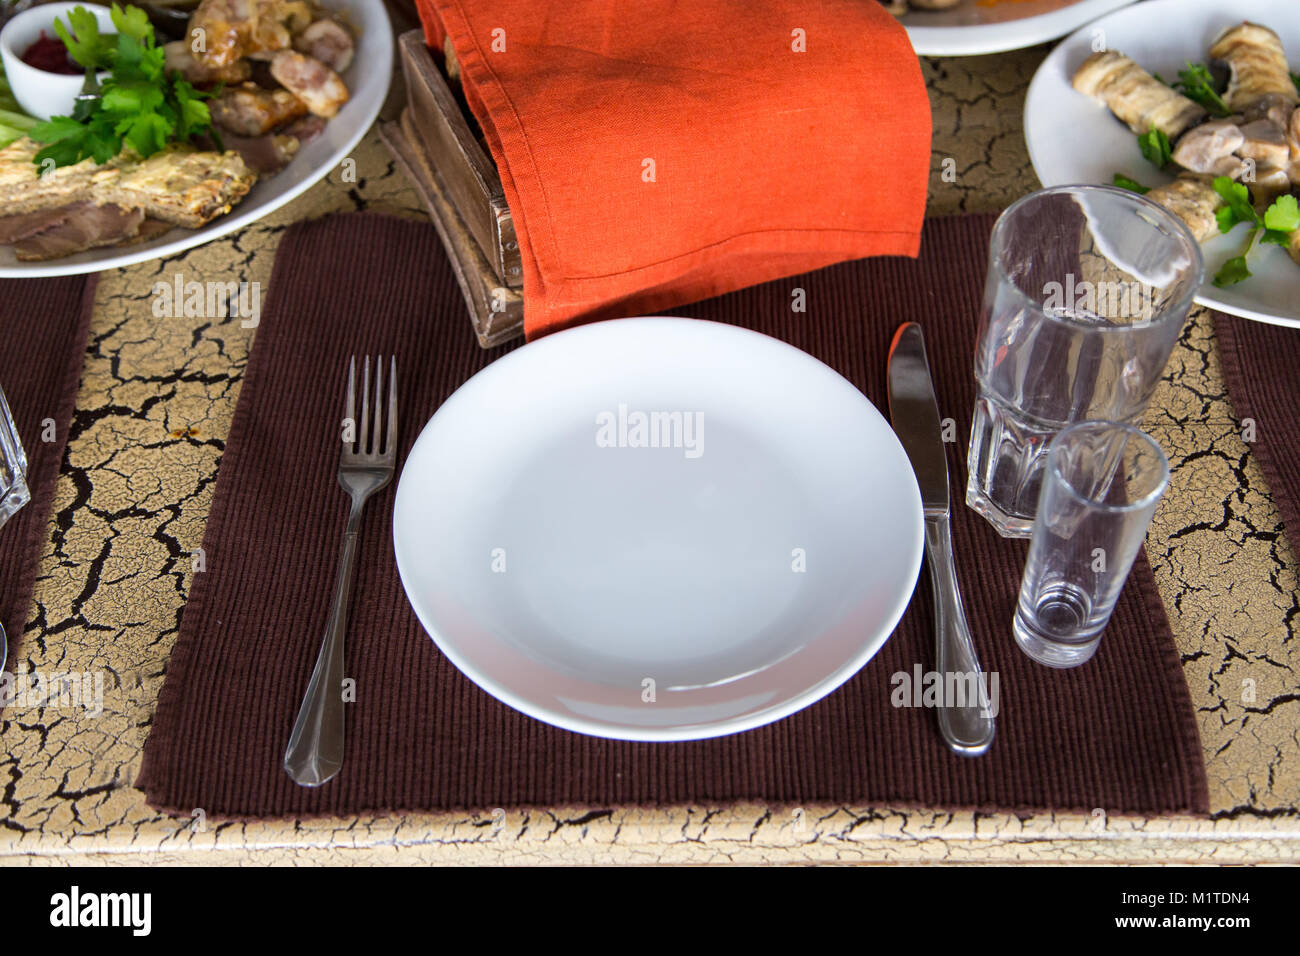 on the brown napkin, on the table is flatware per person, fork, knife, two glasses, on the background there are rolls of eggplant and grilled vegetabl Stock Photo